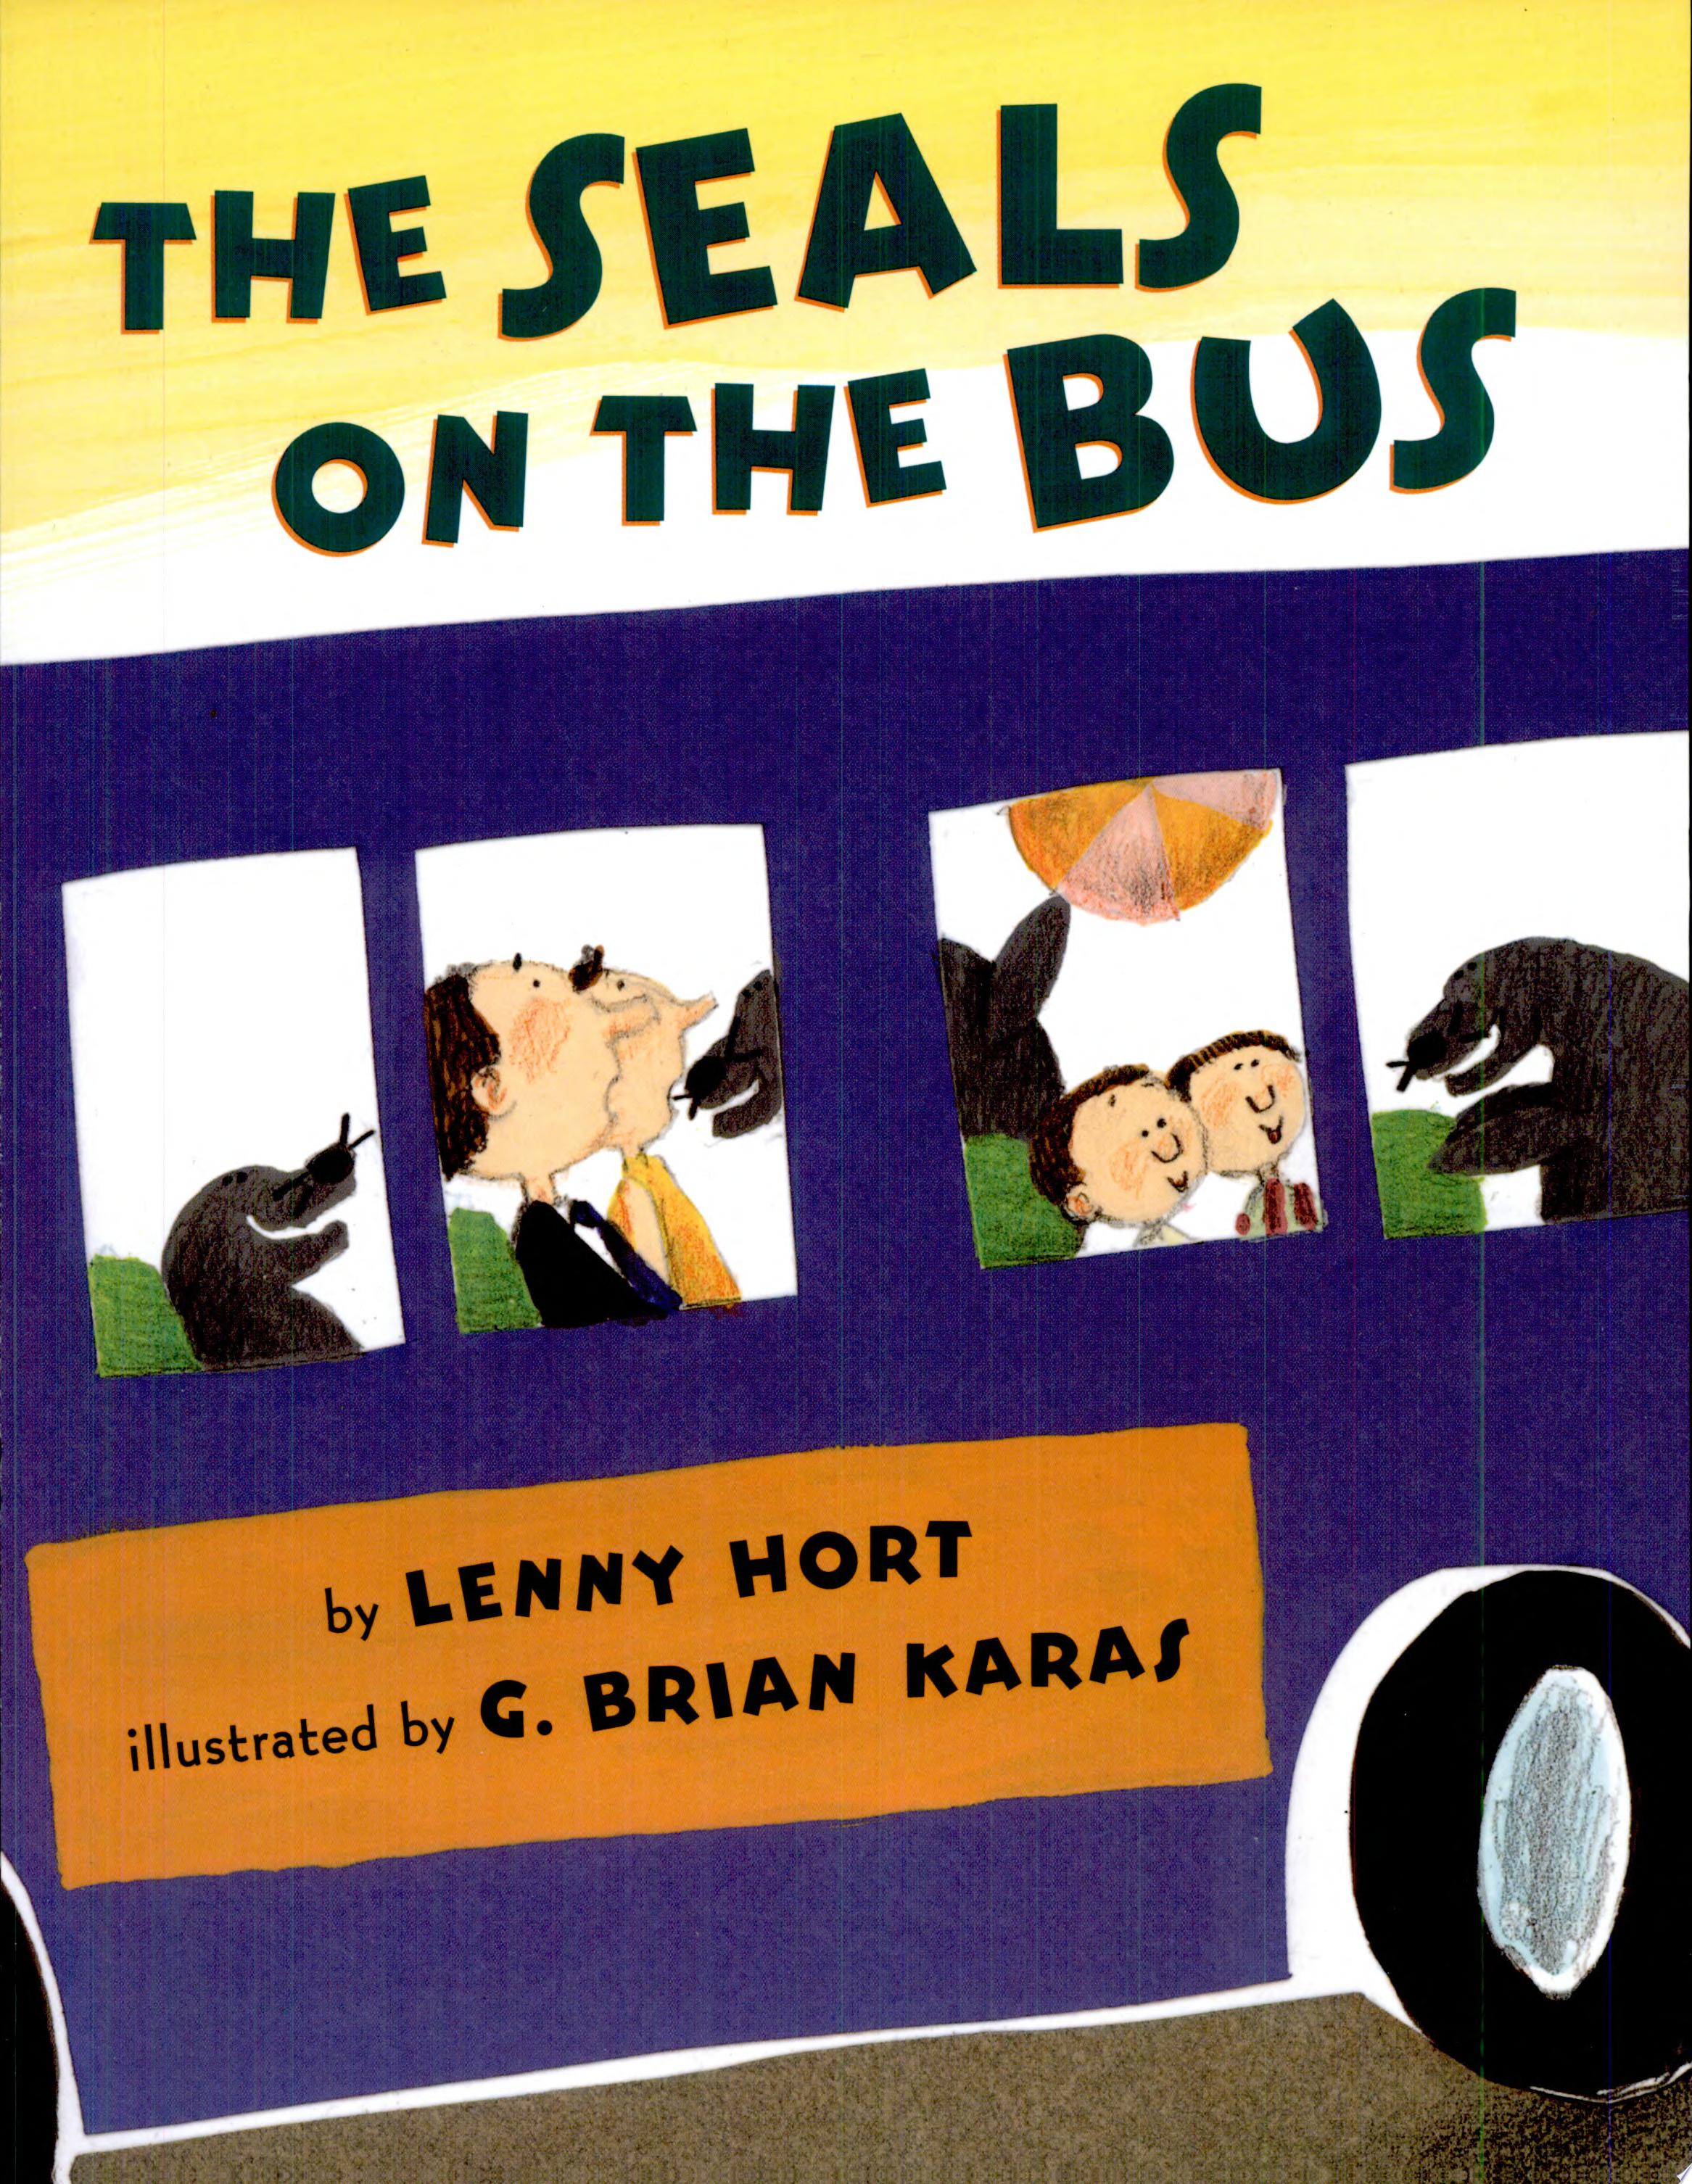 Image for "The Seals on the Bus"